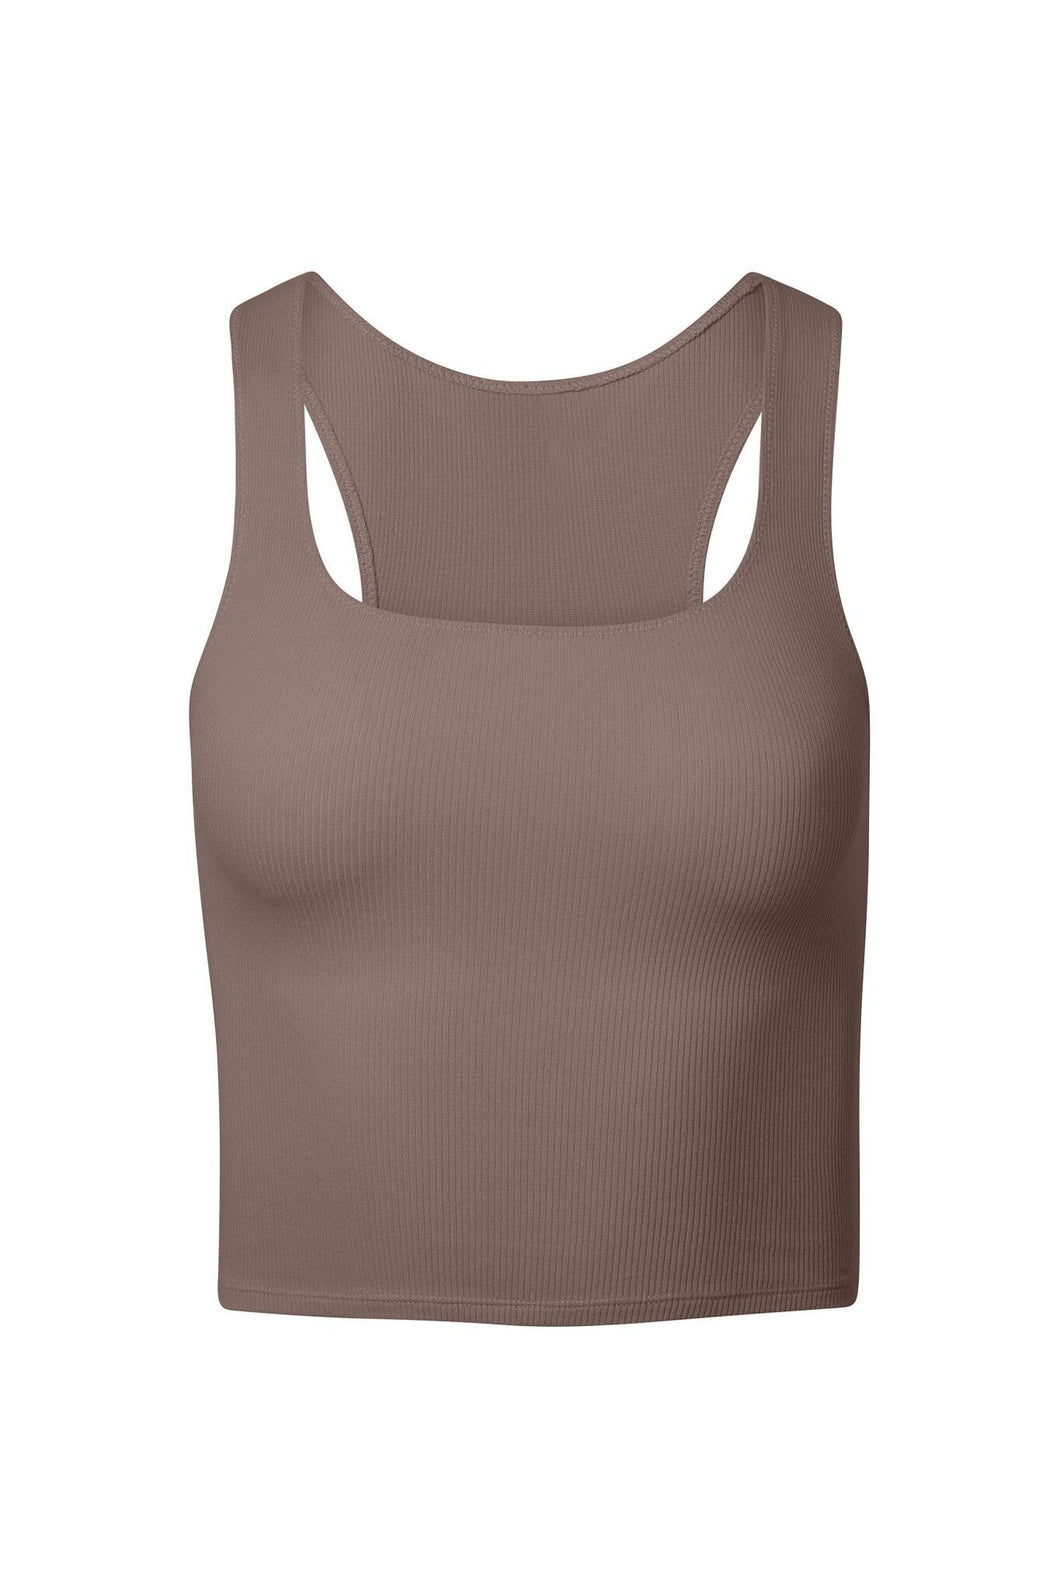 nueskin Jody in color Deep Taupe and shape tank